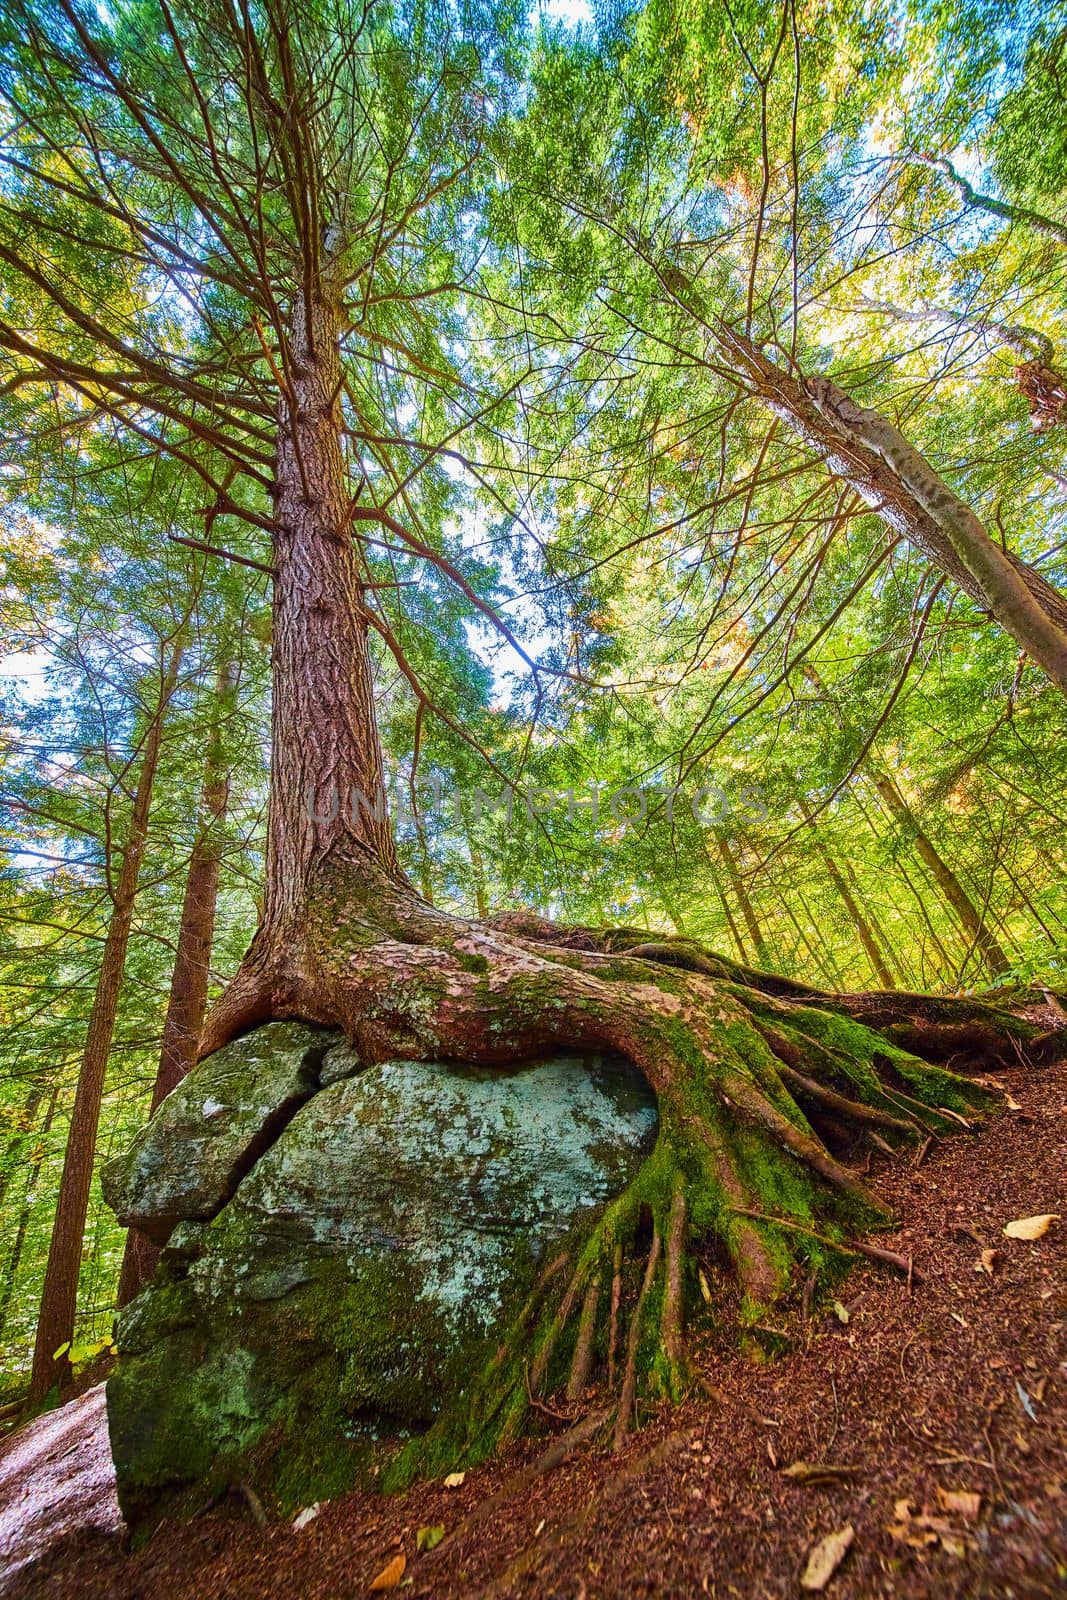 Image of Lush green forest tree growing over boulder with exposed roots looking up from ground level